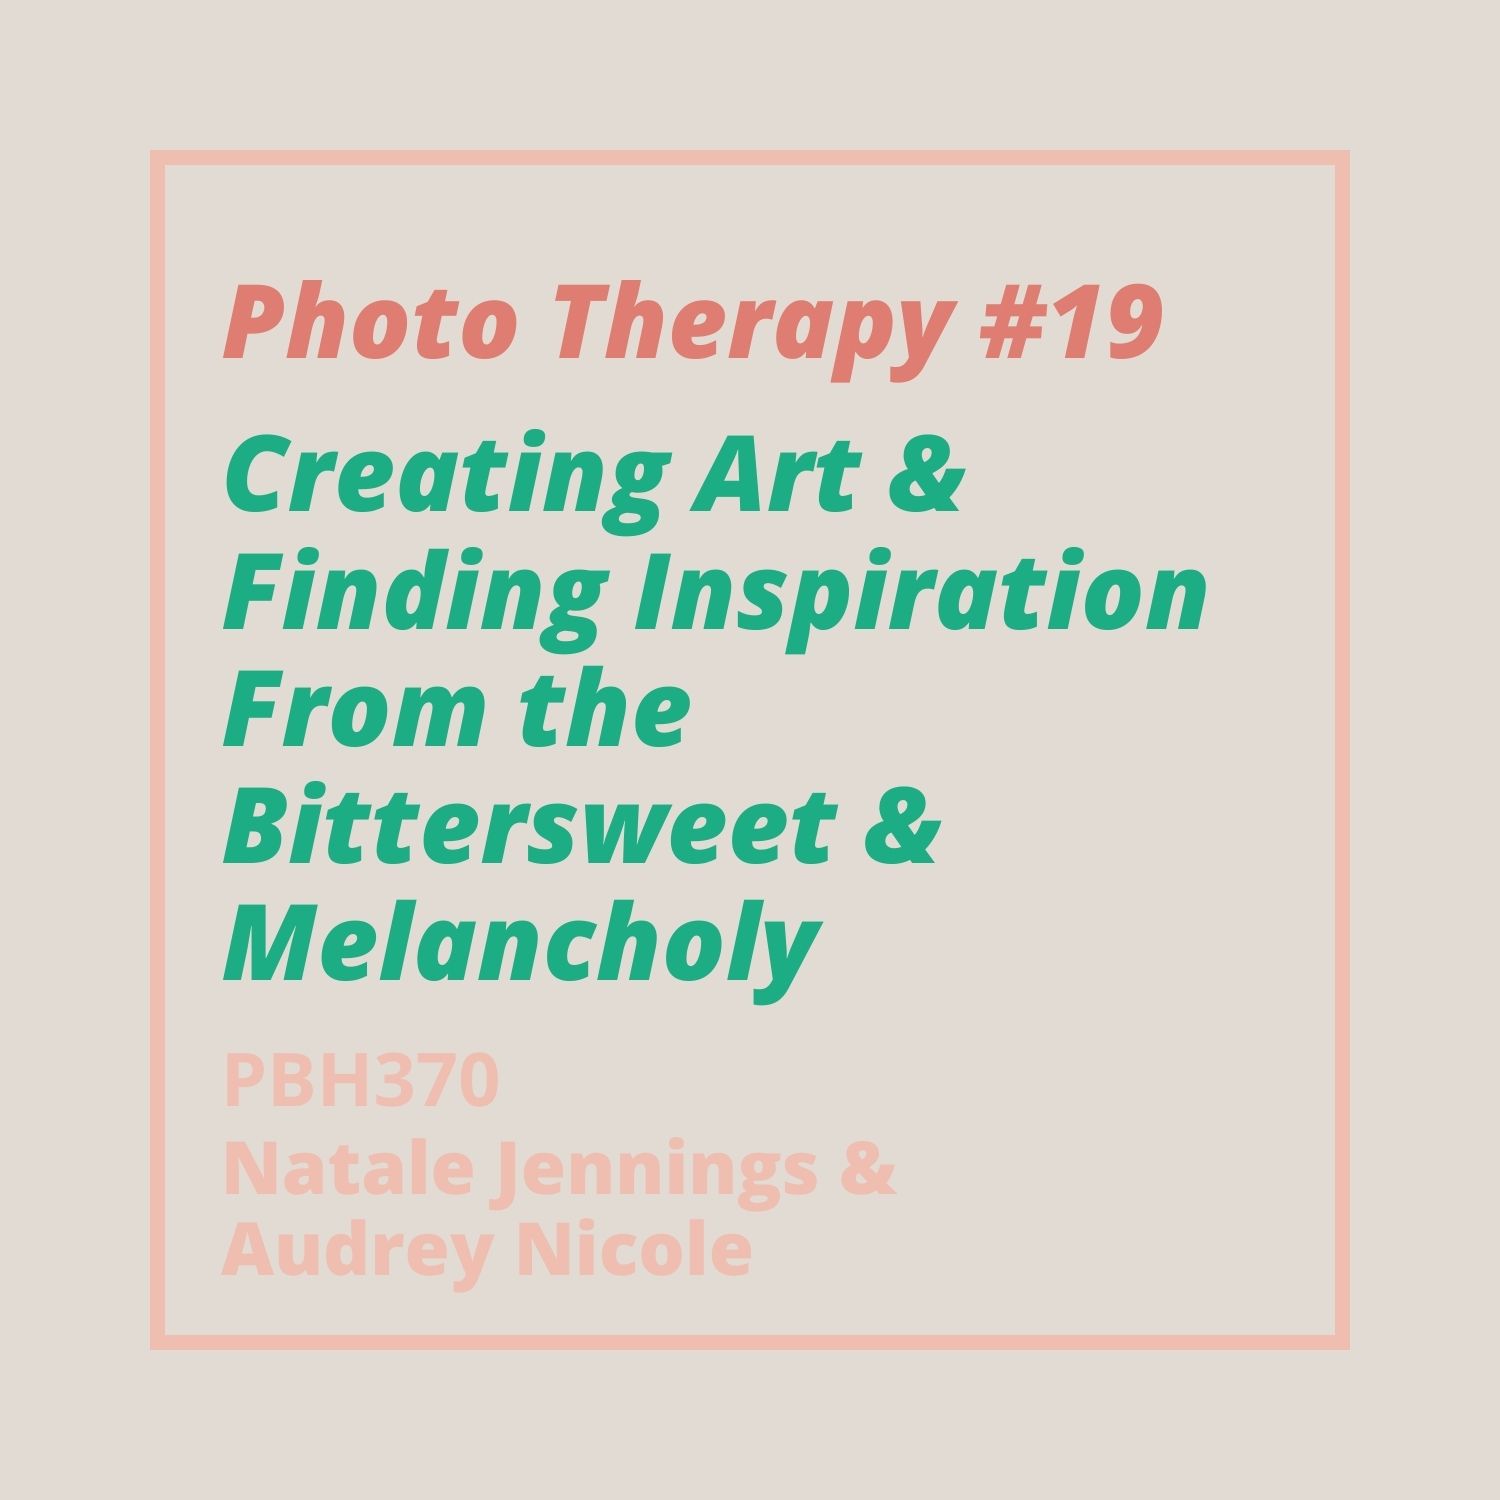 370: Photo Therapy #19 - Creating Art & Finding Inspiration From the Bittersweet & Melancholy